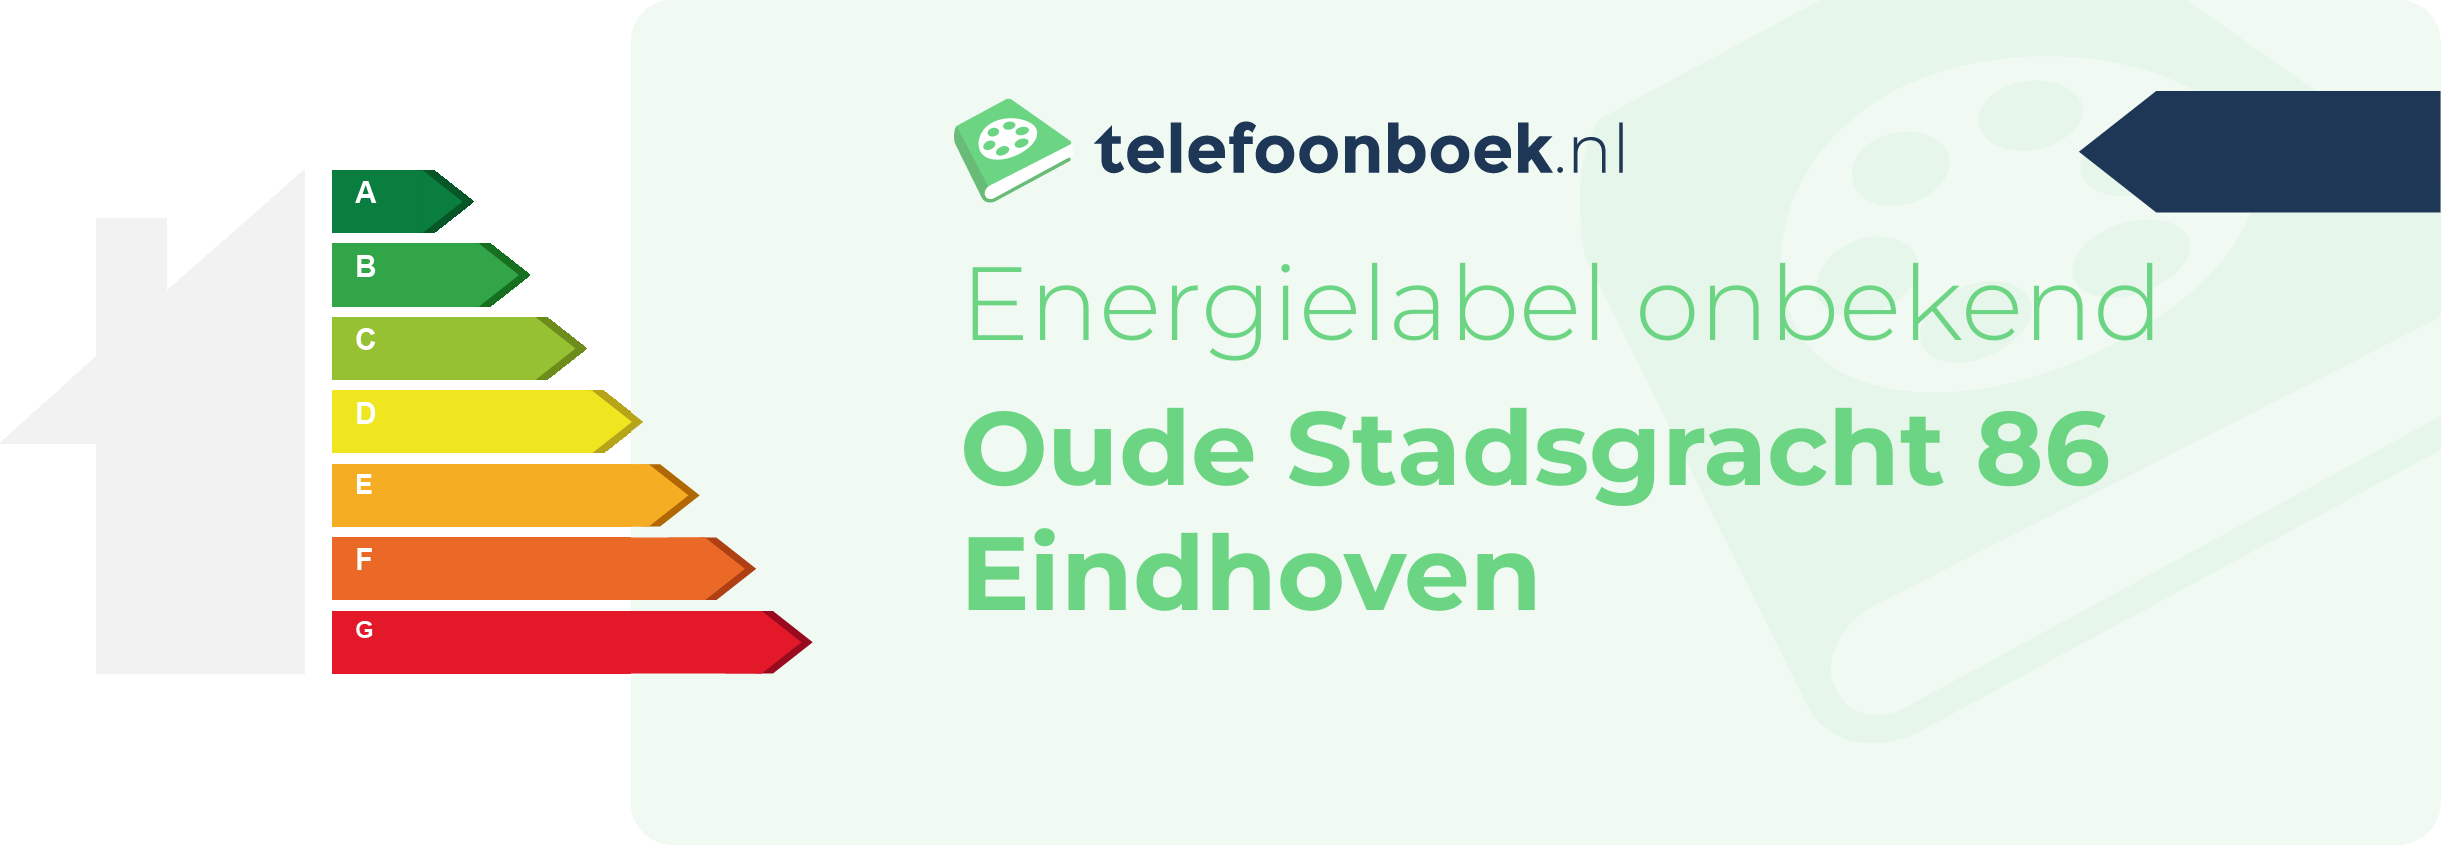 Energielabel Oude Stadsgracht 86 Eindhoven